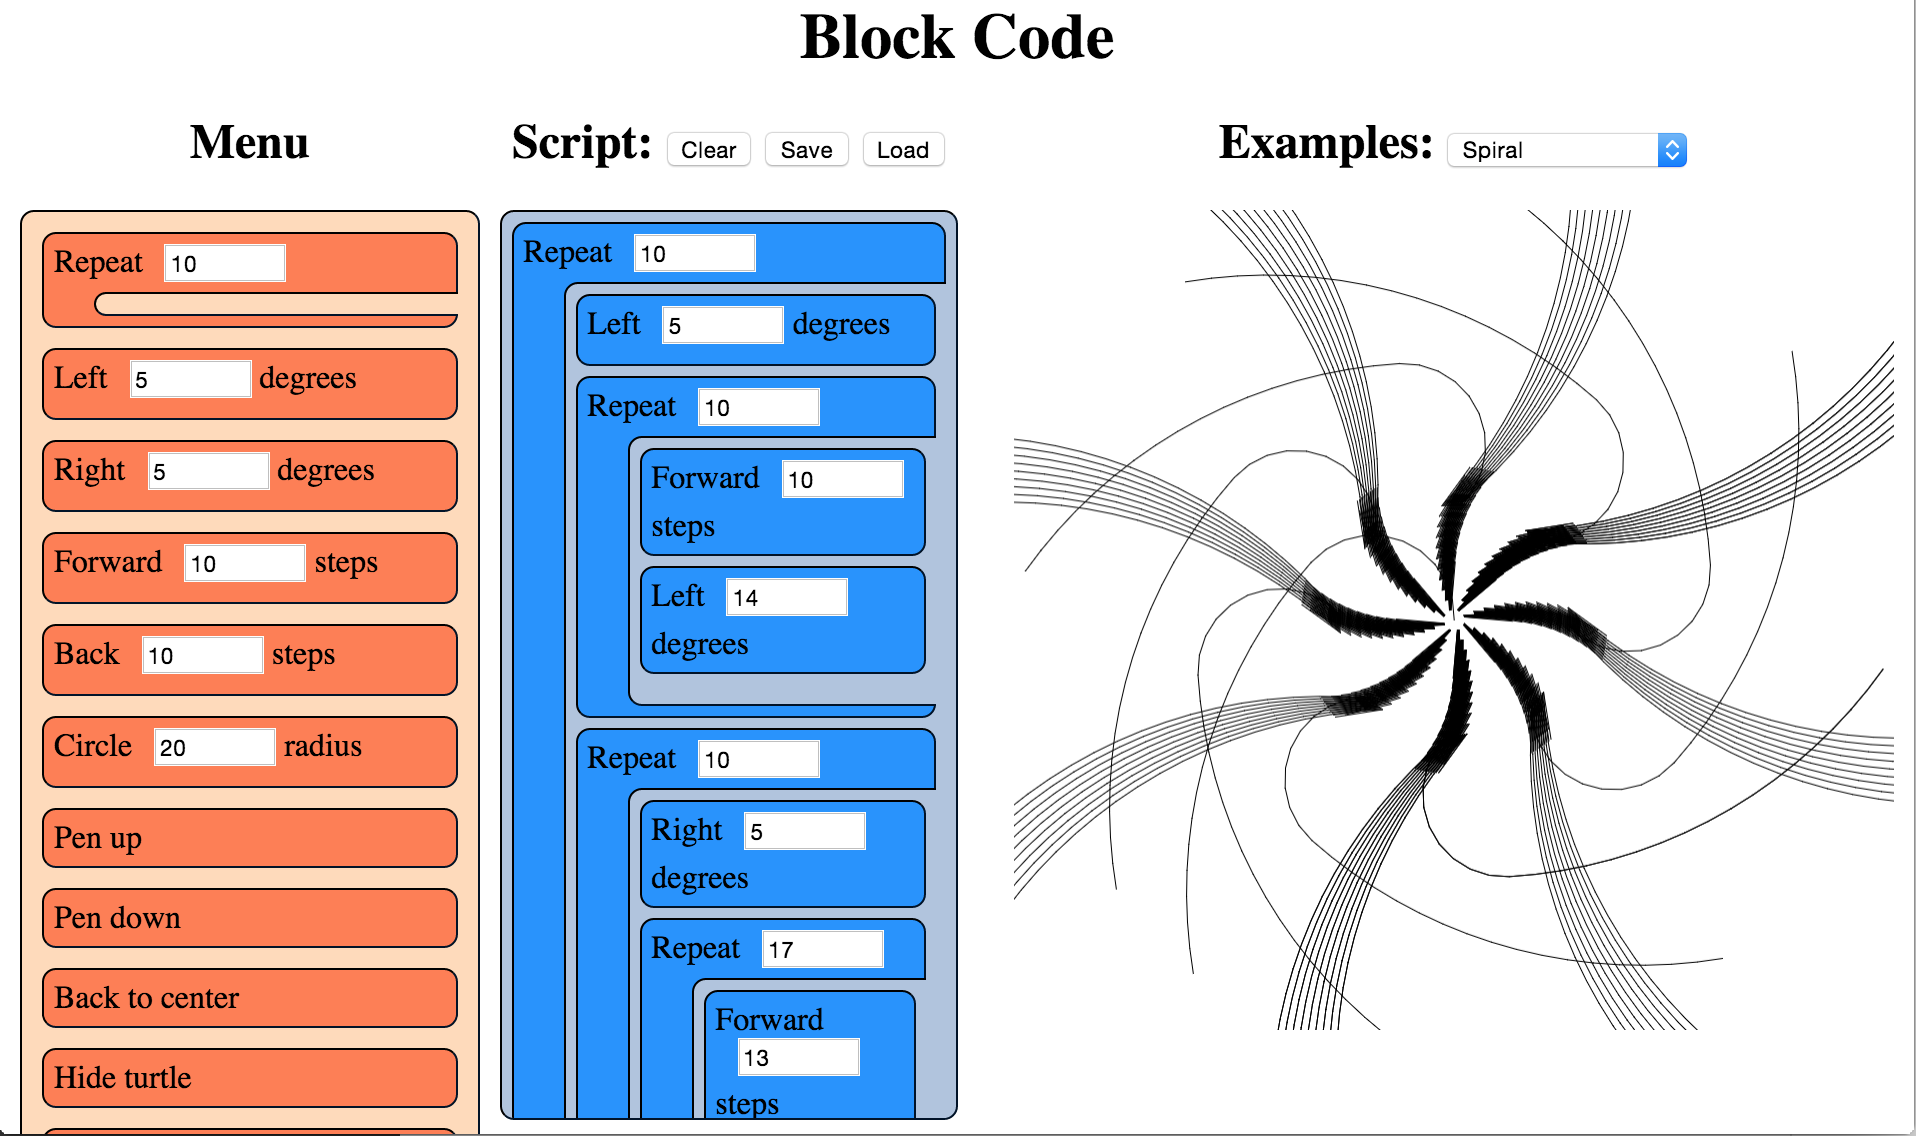 Figure 1.1 - The Blockcode IDE in use